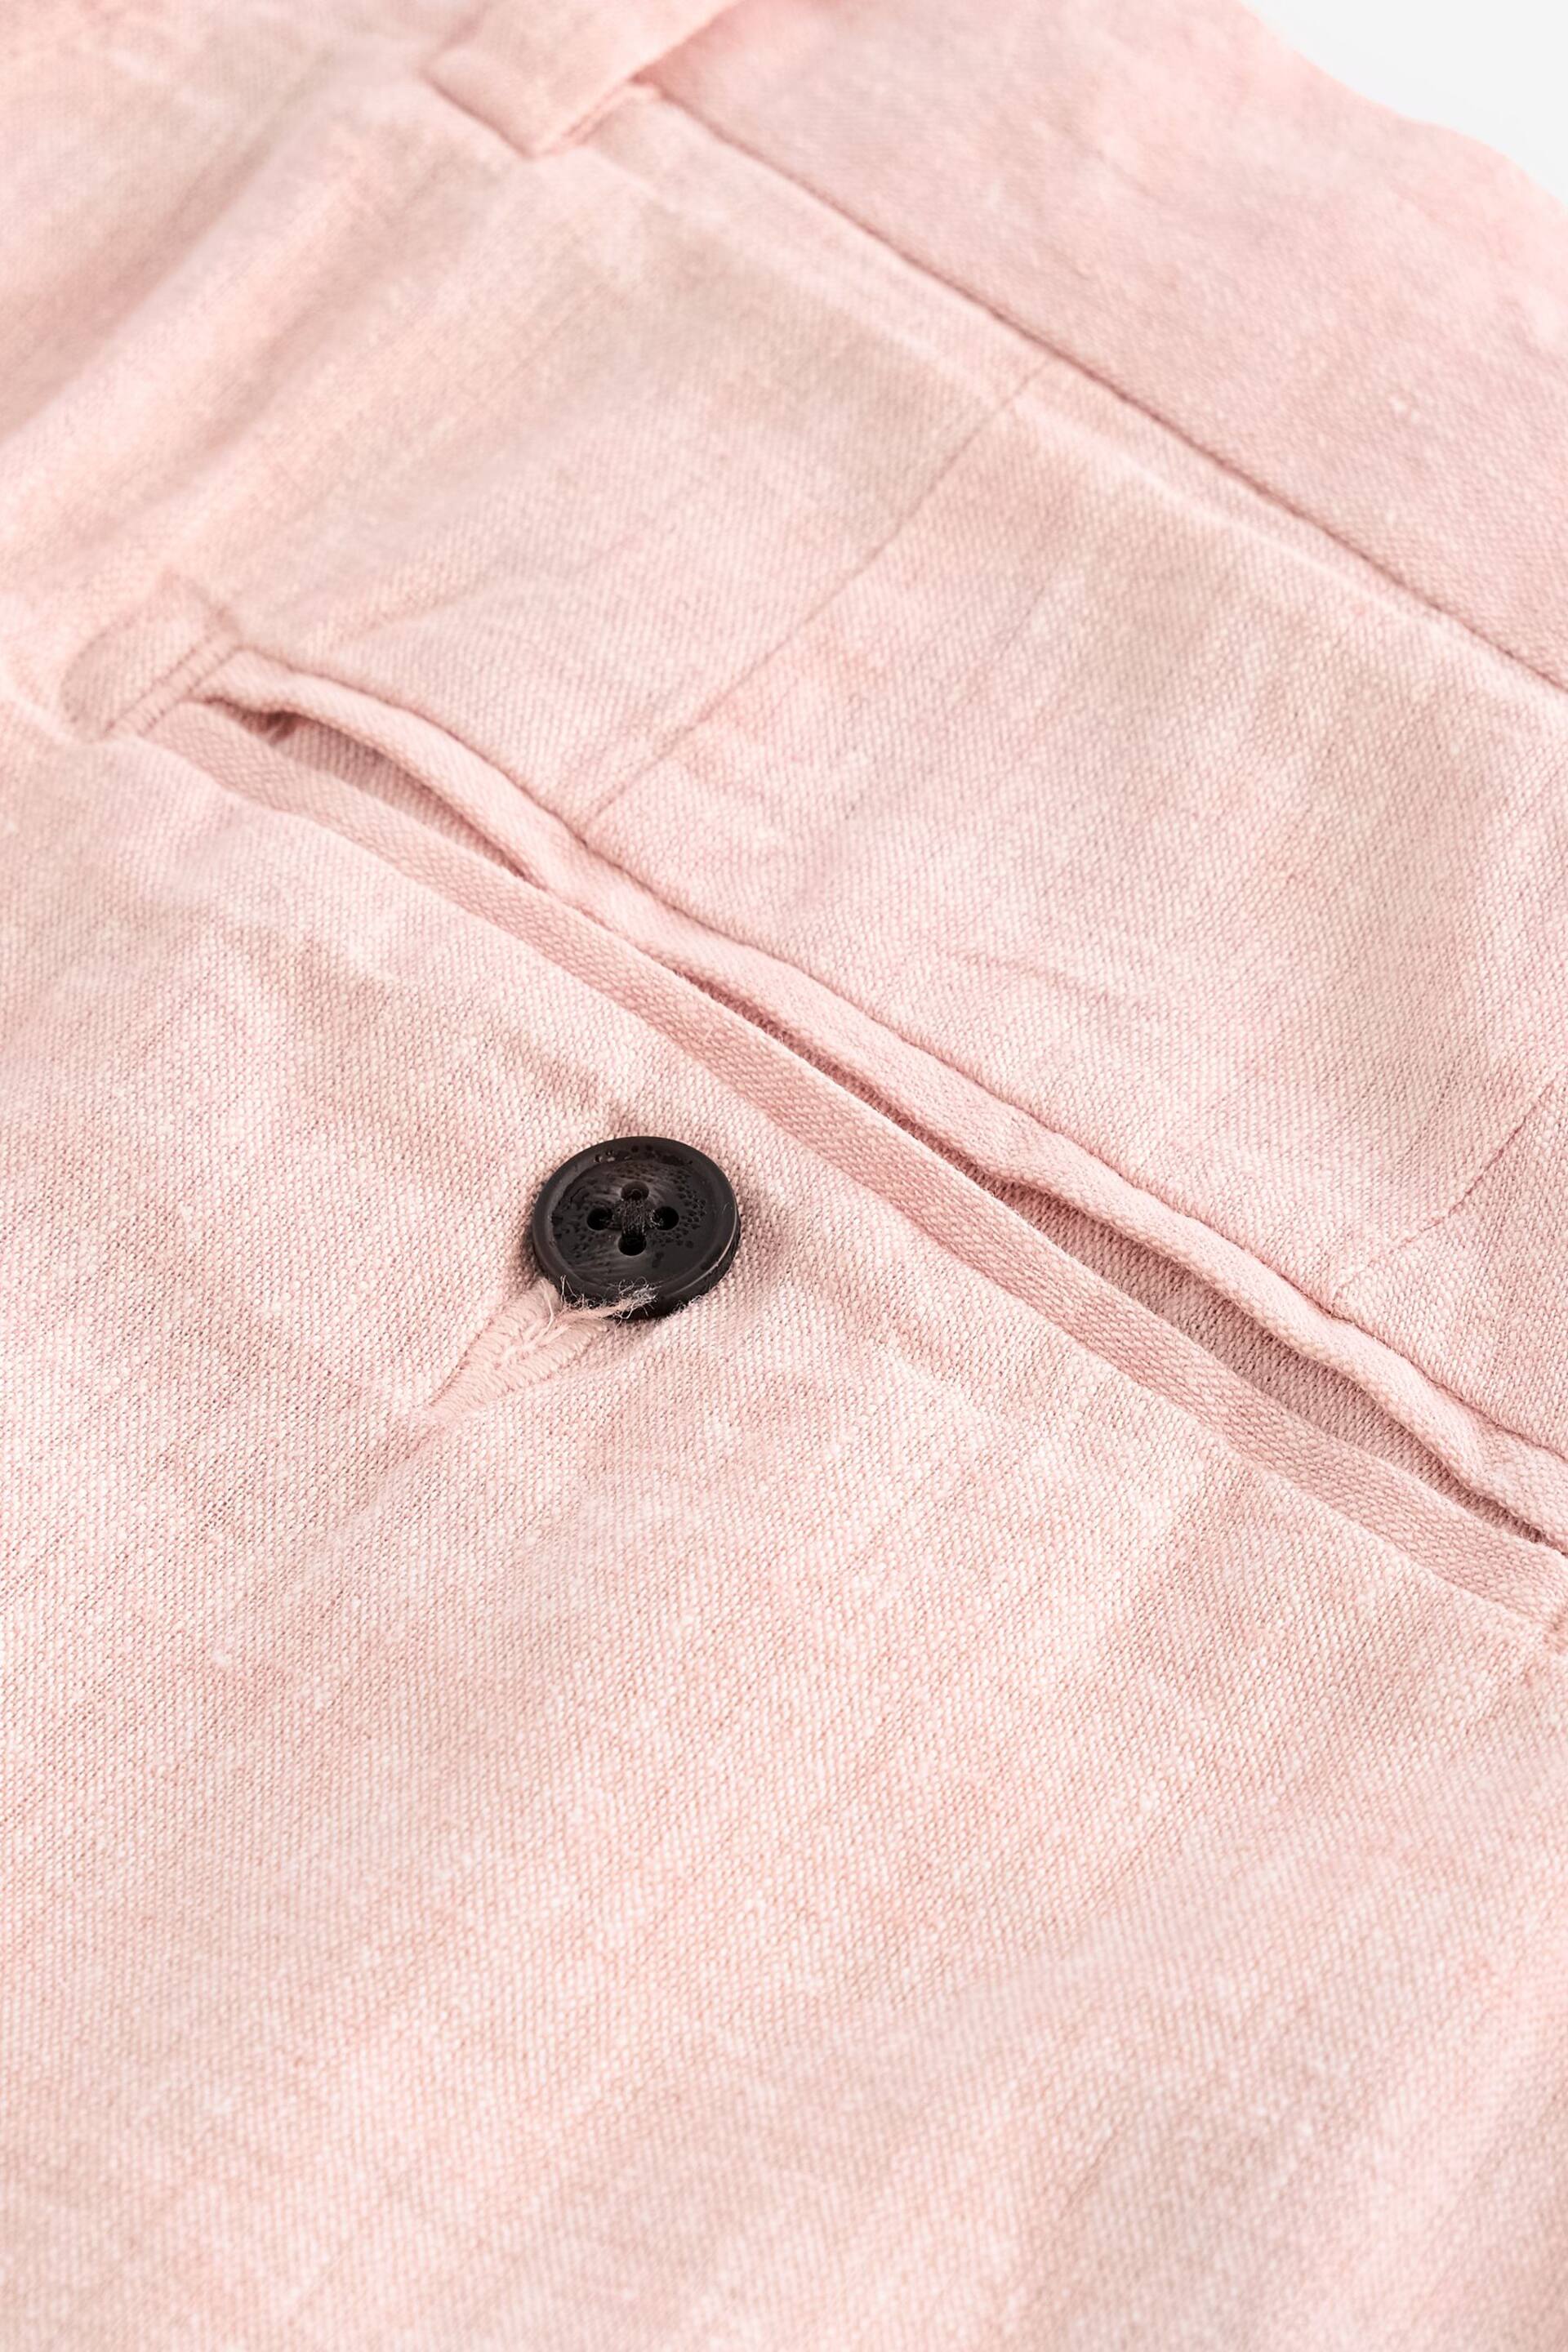 Pink Linen Cotton Chino Shorts with Belt Included - Image 7 of 8